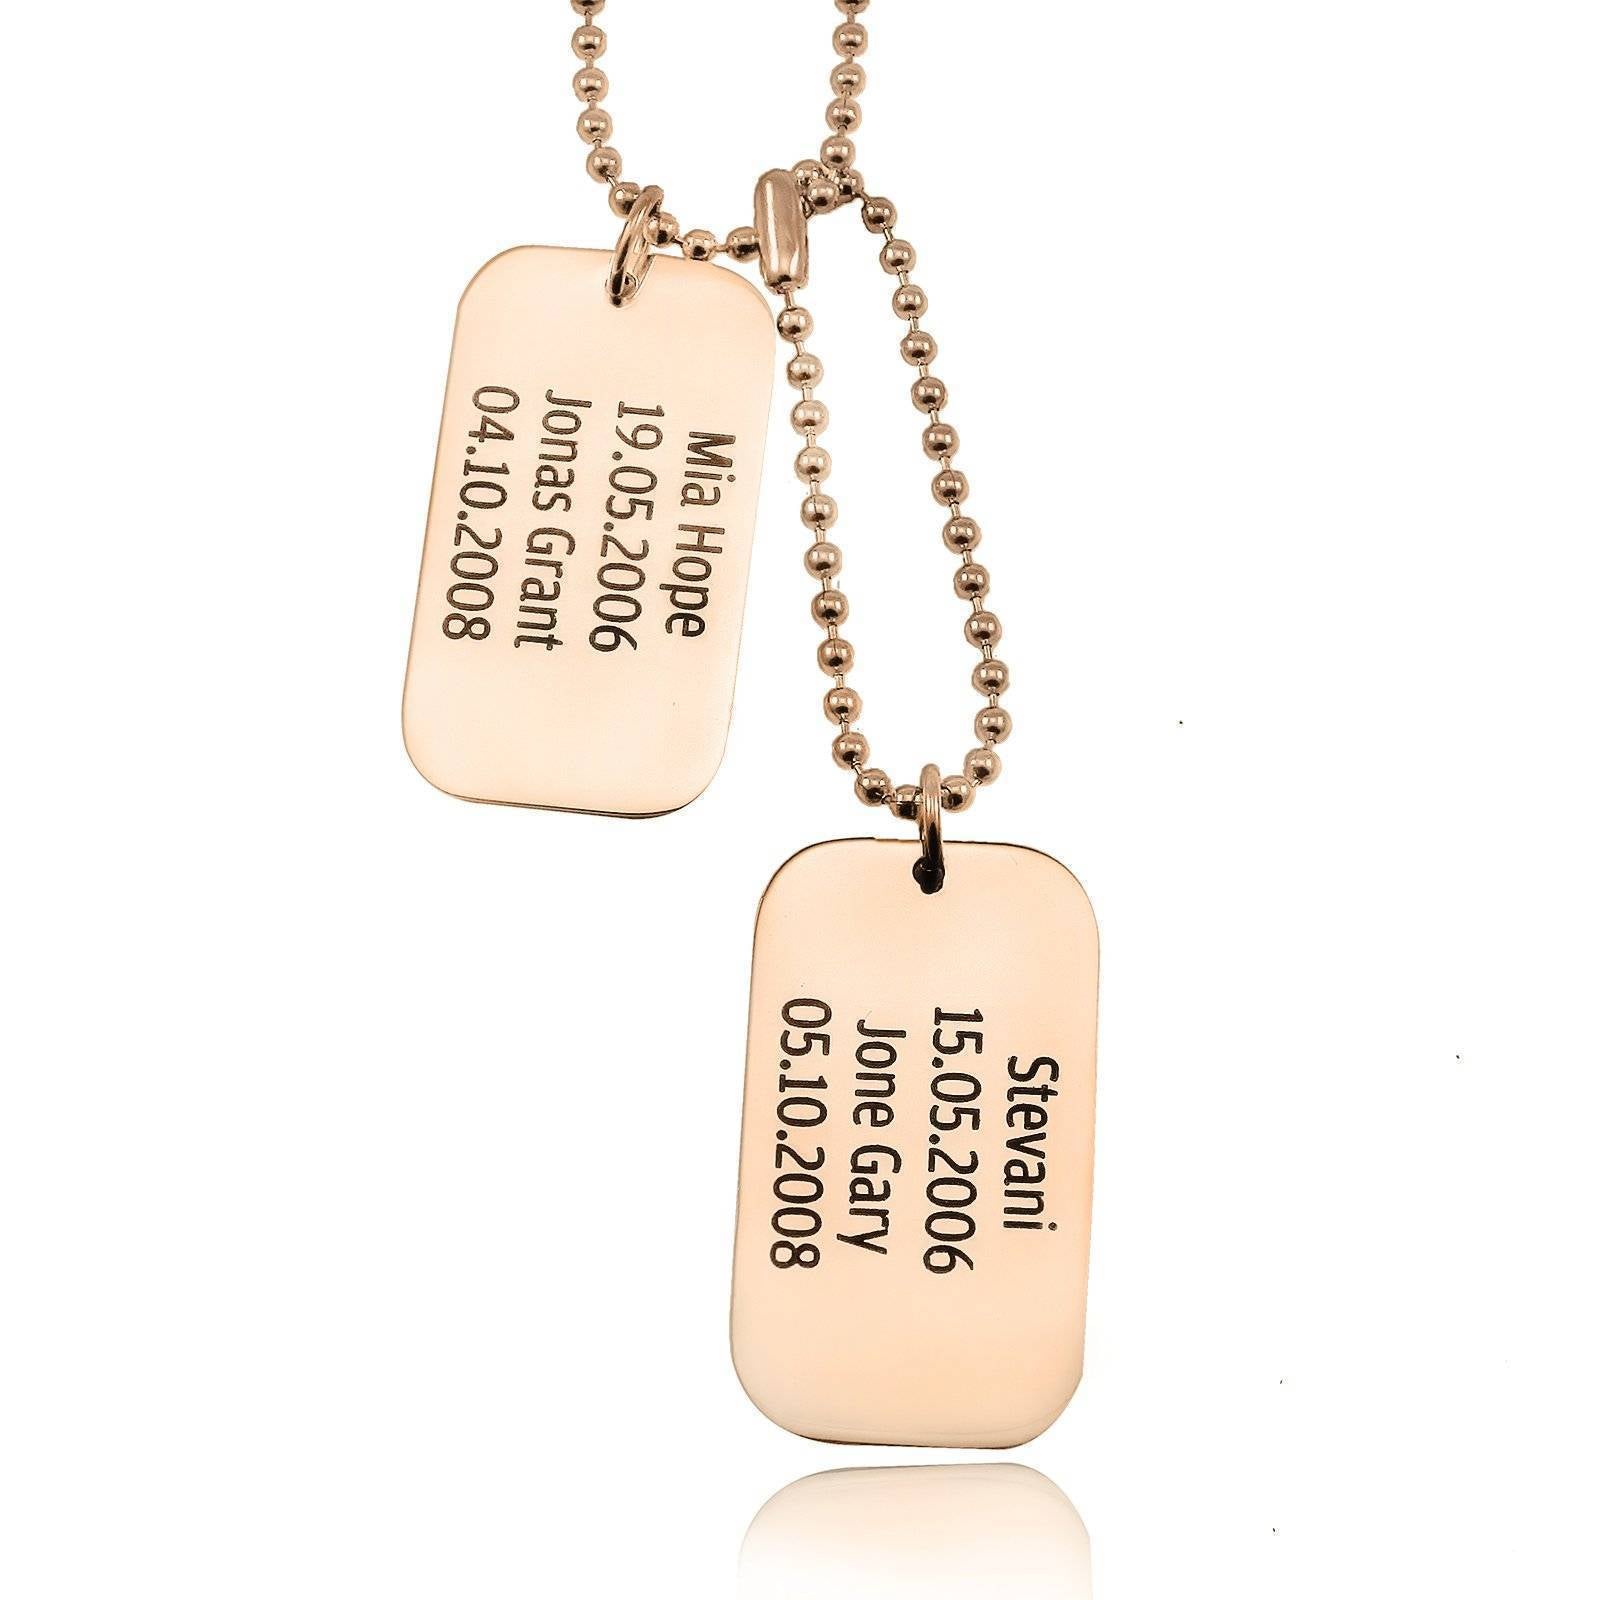 Dog Tag Necklace DOUBLE - Mens Jewellery by Belle Fever